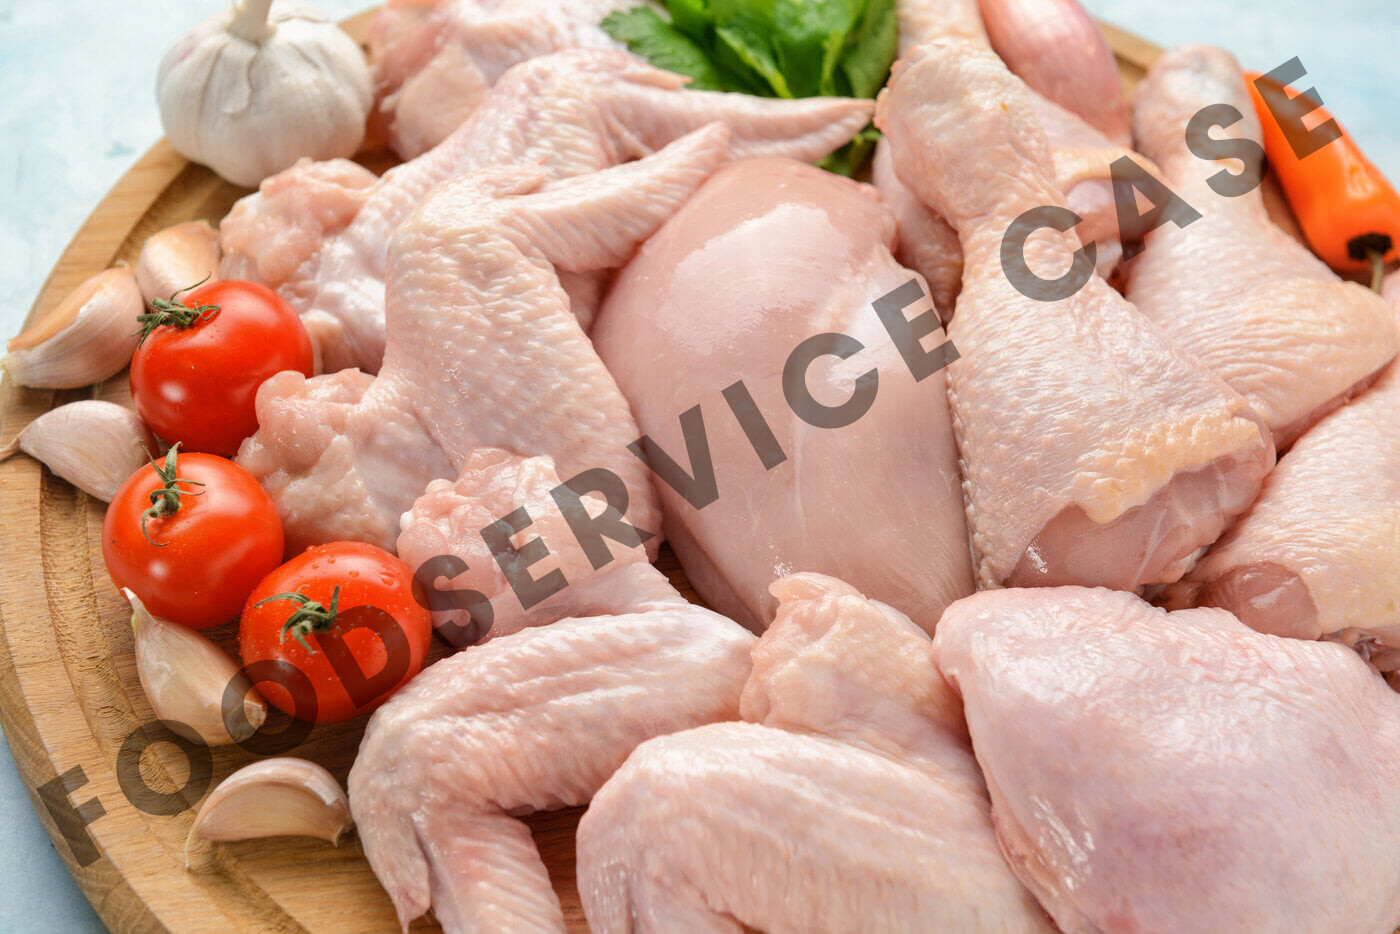 ***FOODSERVICE CASE*** of Chicken Cut In Eighths - $2.65/lb (12 Cut Up Fryers)